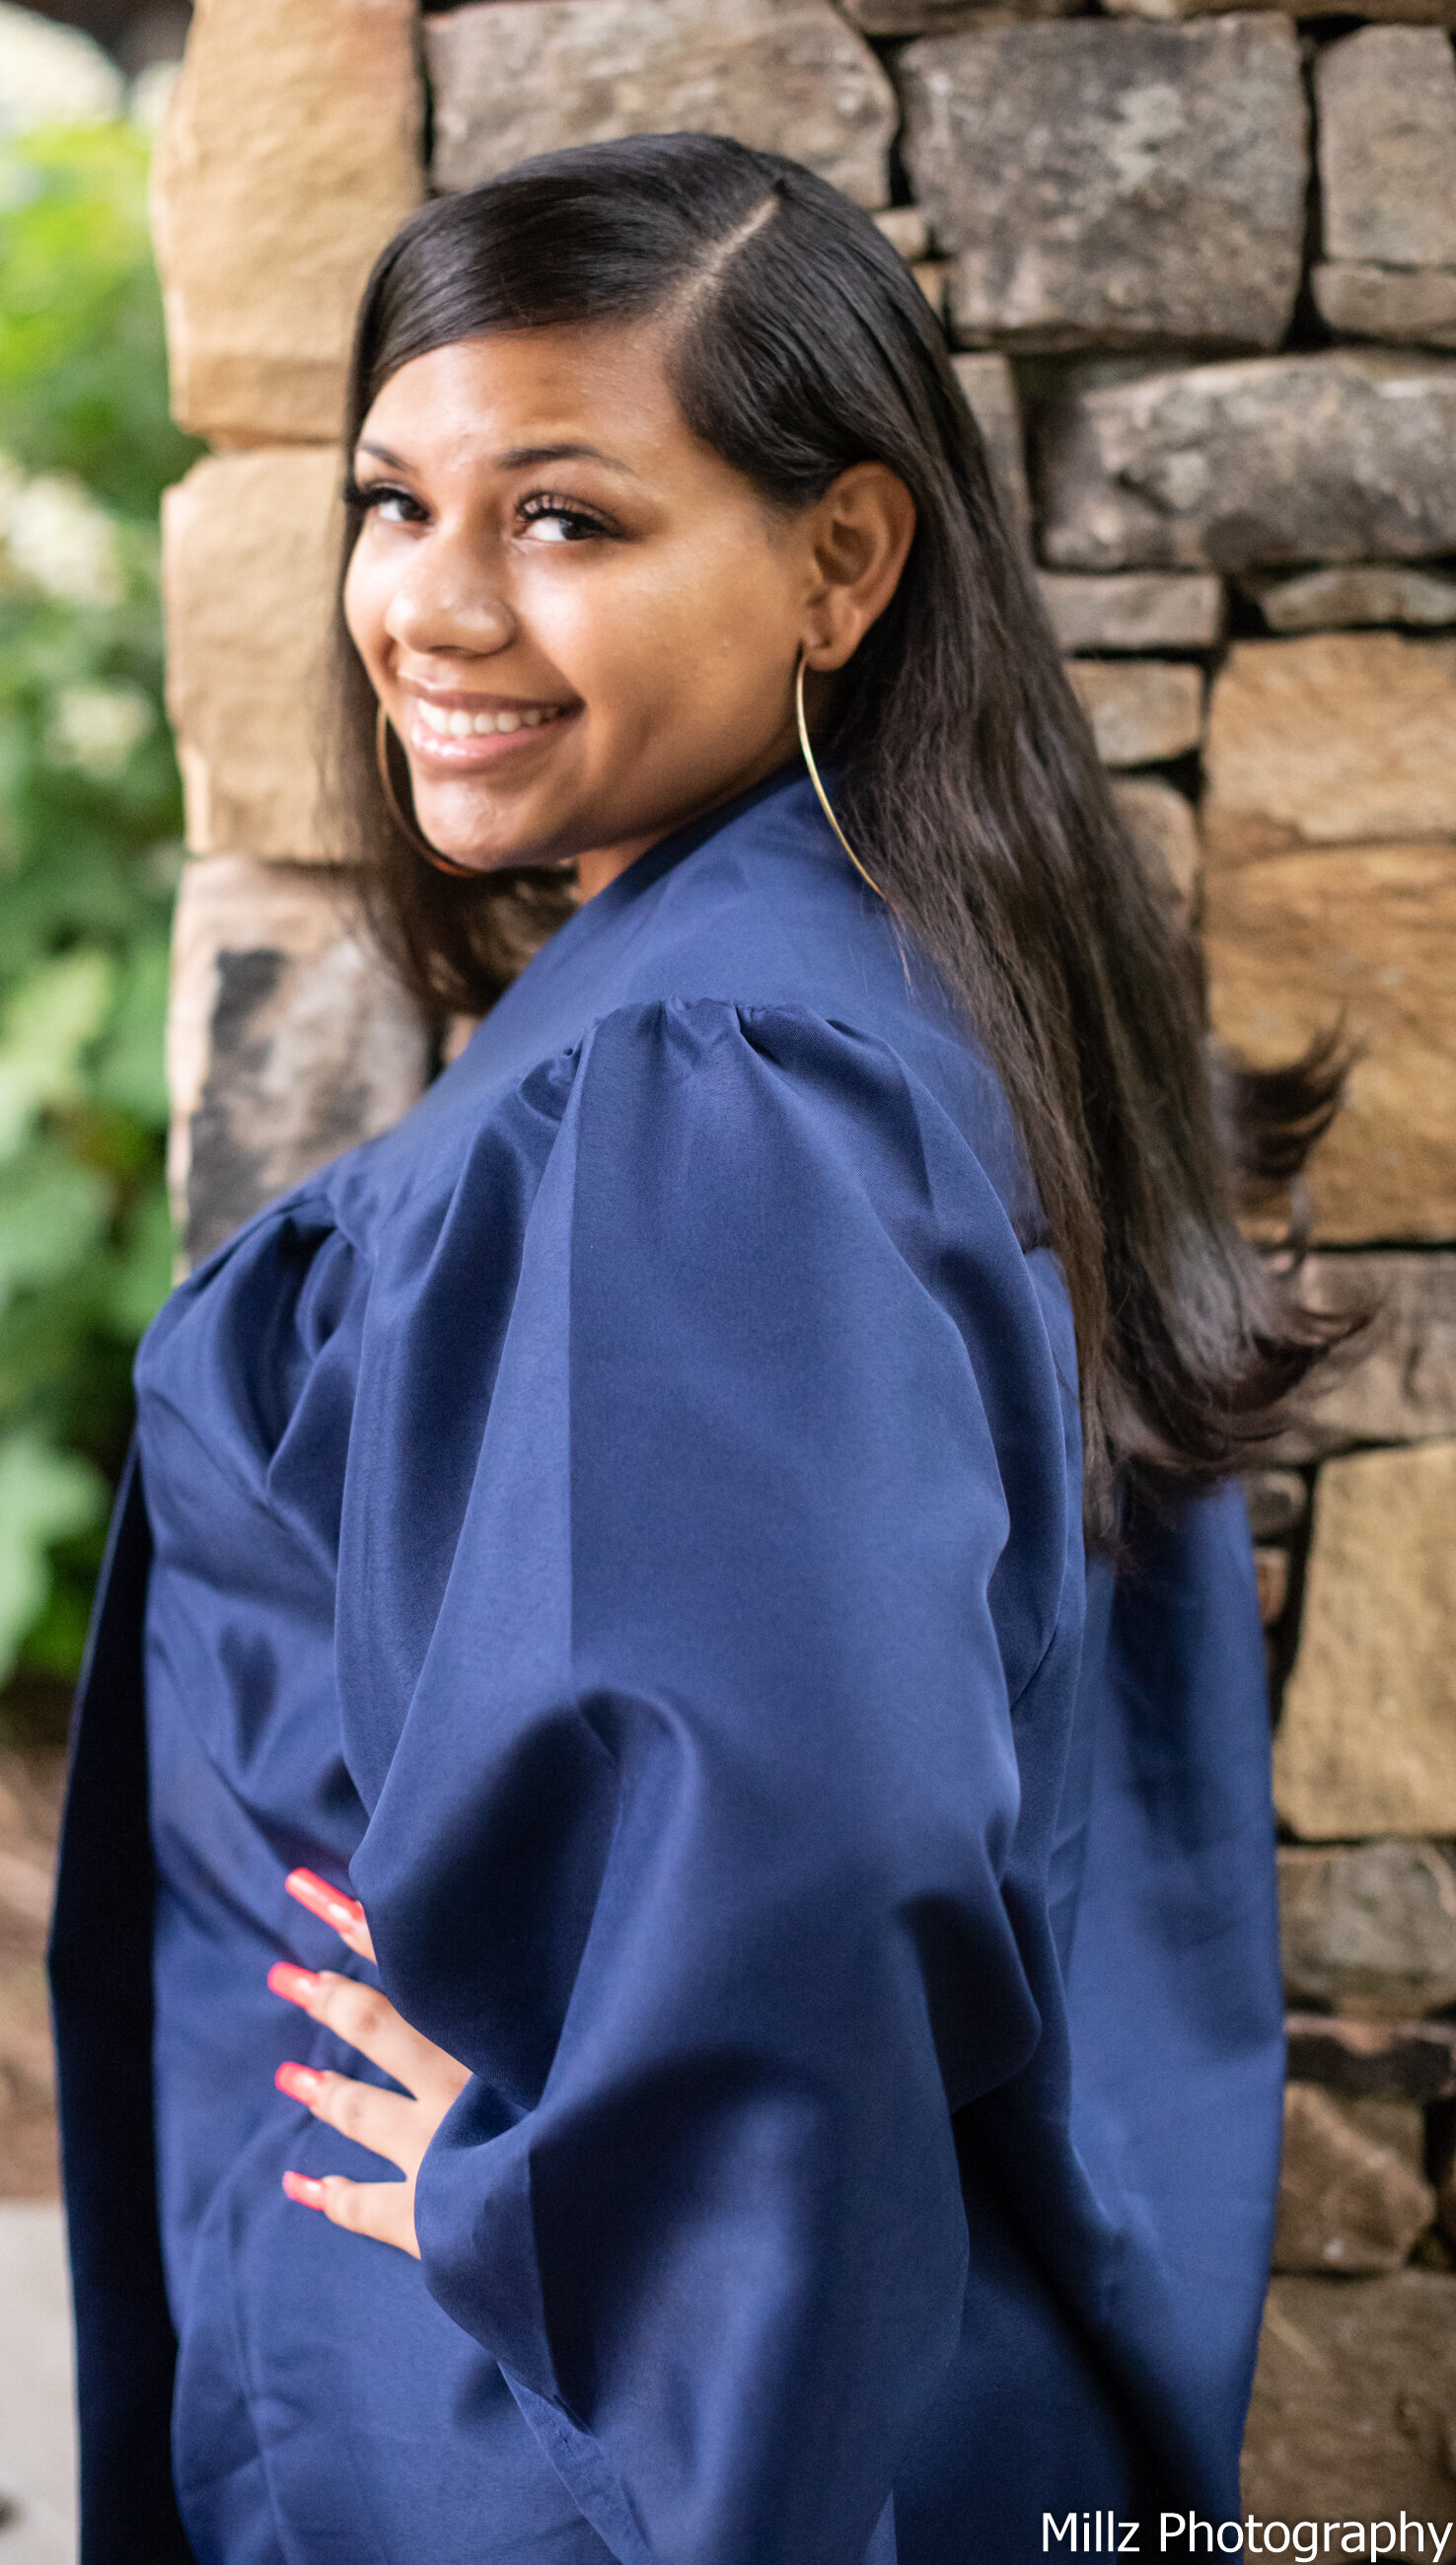 a senior dressed in her blue graduation gown smiling at the camera photographed by Millz Photography in Greenville, SC